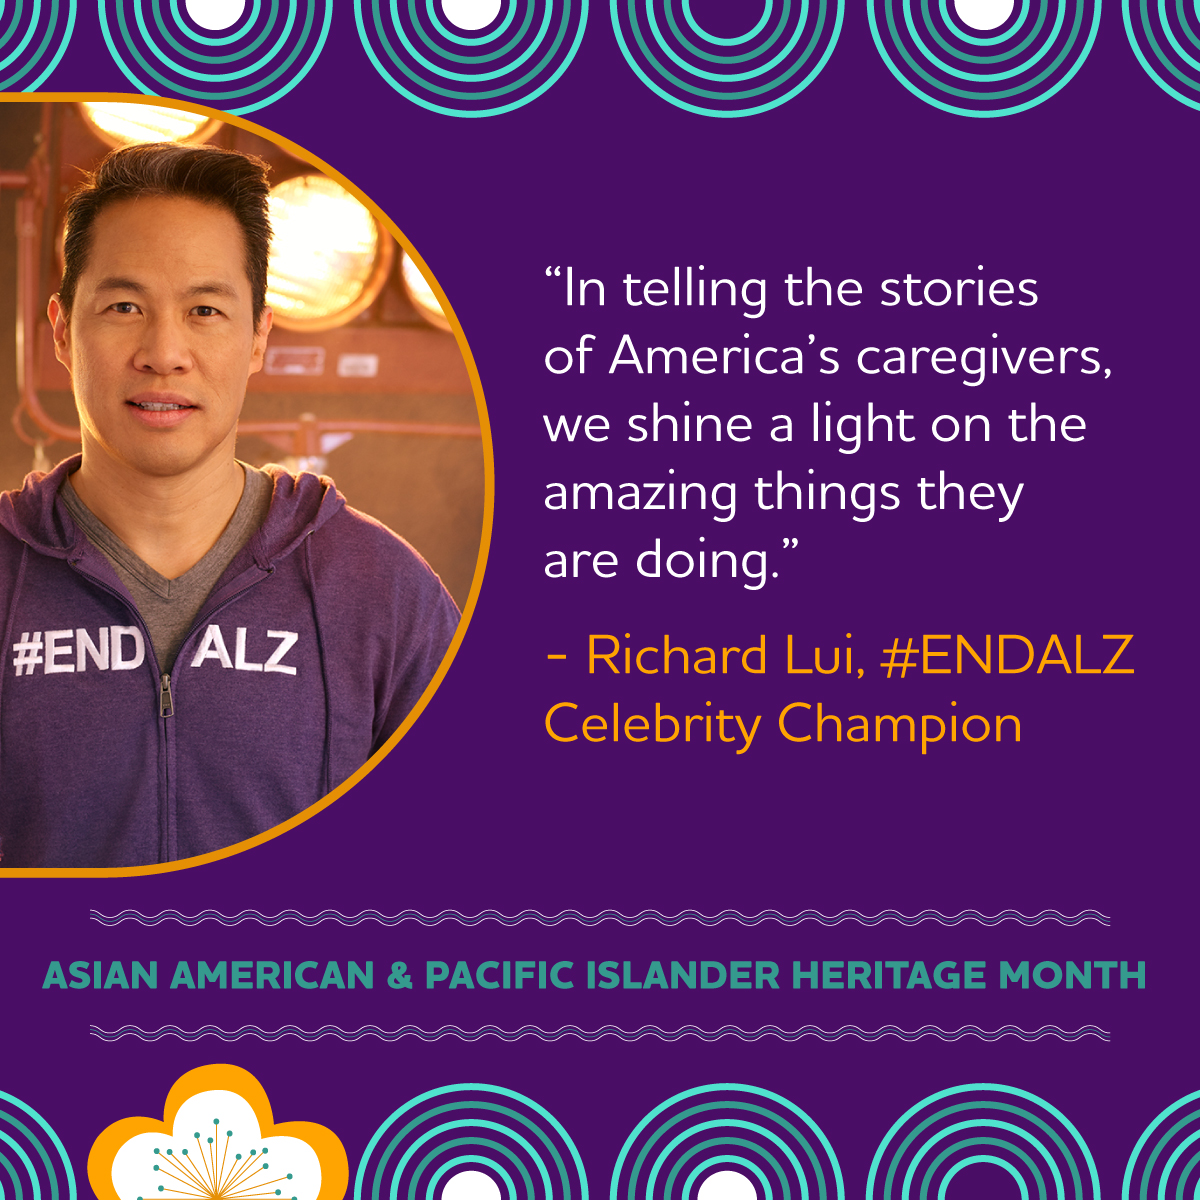 This month, join us in celebrating the contributions of Asian Americans and Pacific Islanders, like journalist, caregiver & #ENDALZ Celebrity Champion Richard Lui, who raises Alzheimer’s awareness by sharing his family’s story. #AAPIMonth